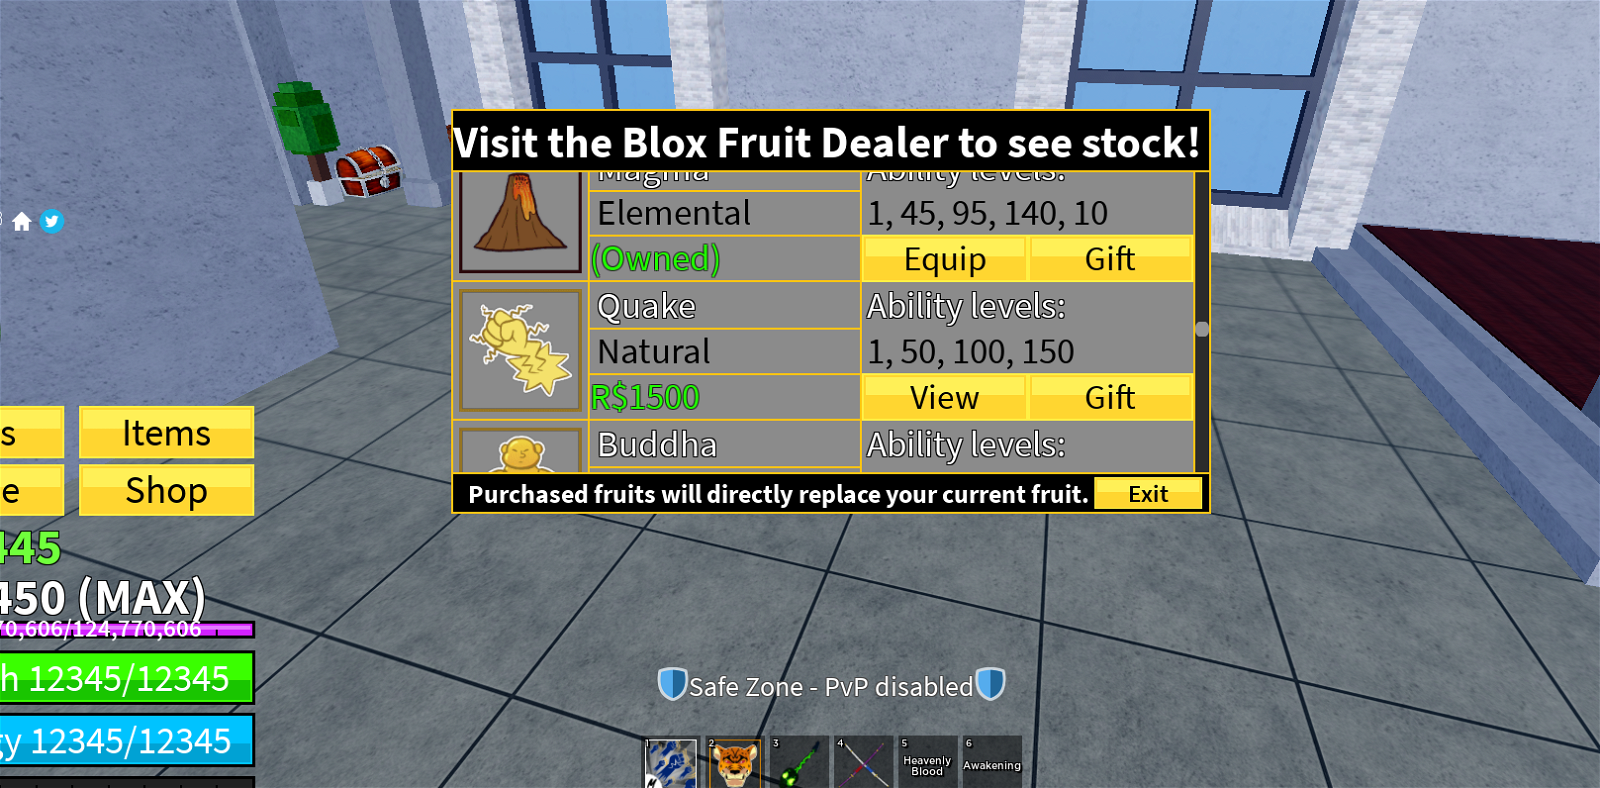 UNVERIFIED Blox Fruit : MAX Level 2450, 1 V4 RACE HUMAN, Awake Rumble, Unlocked All Fighting Style, Has Good Fruit in Inventory